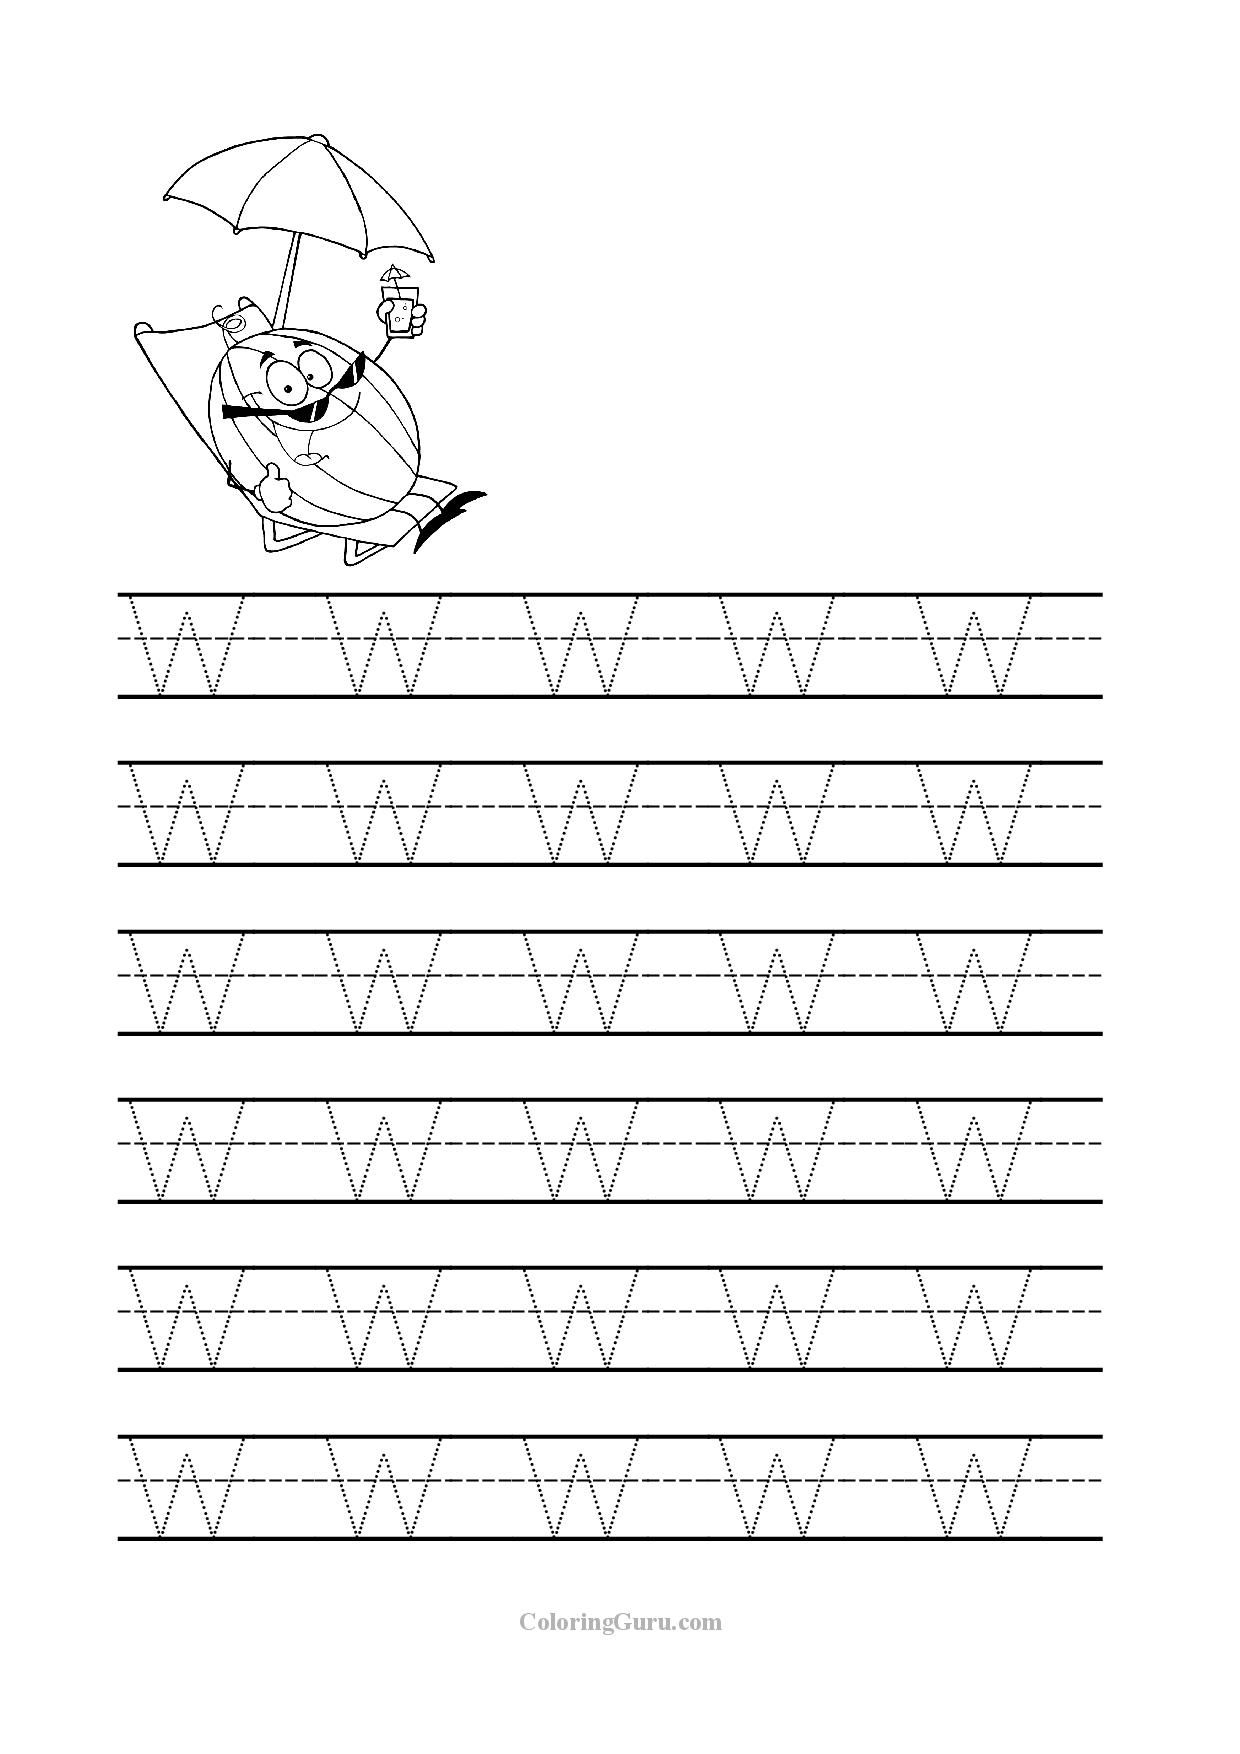 Free Printable Tracing Letter W Worksheets For Preschool with regard to Letter W Tracing Preschool